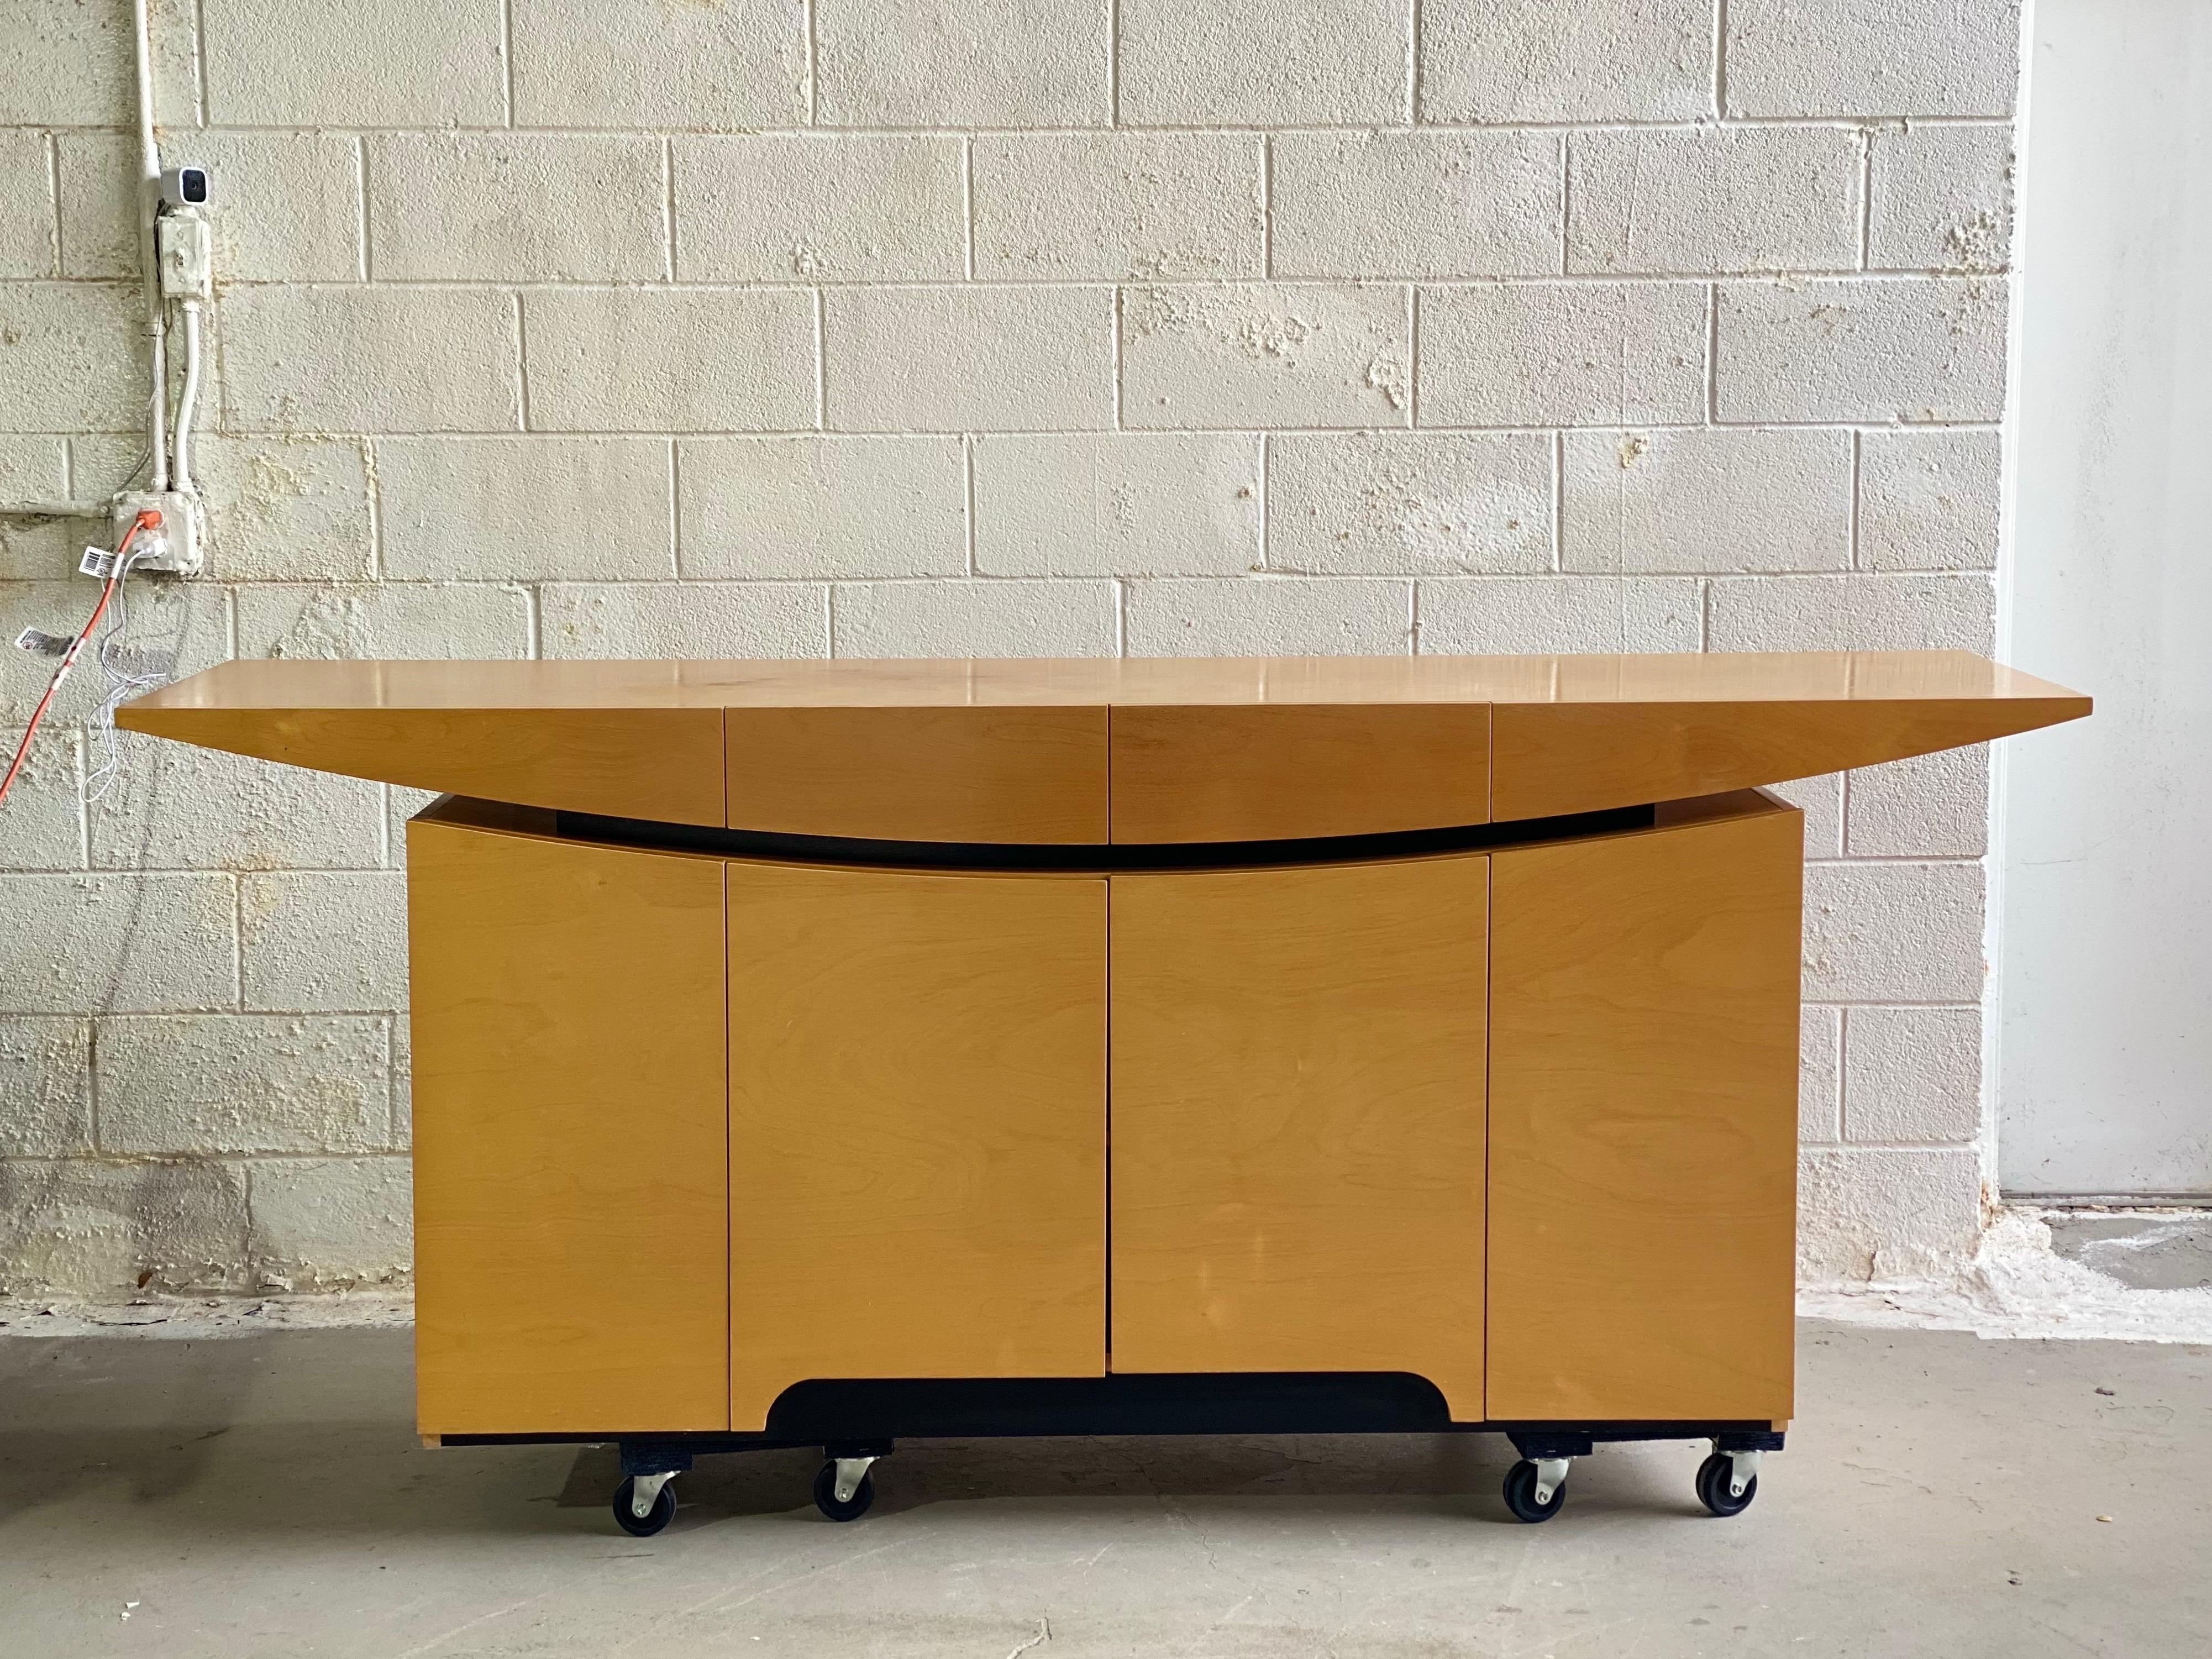 We are very pleased to offer an exquisite sideboard, circa the 1980s.  This piece perfectly embodies the Italian Art Deco style, distinguished by simple, clean shapes, with a “streamlined” look, and ornamentation that is geometric.  Showcasing a